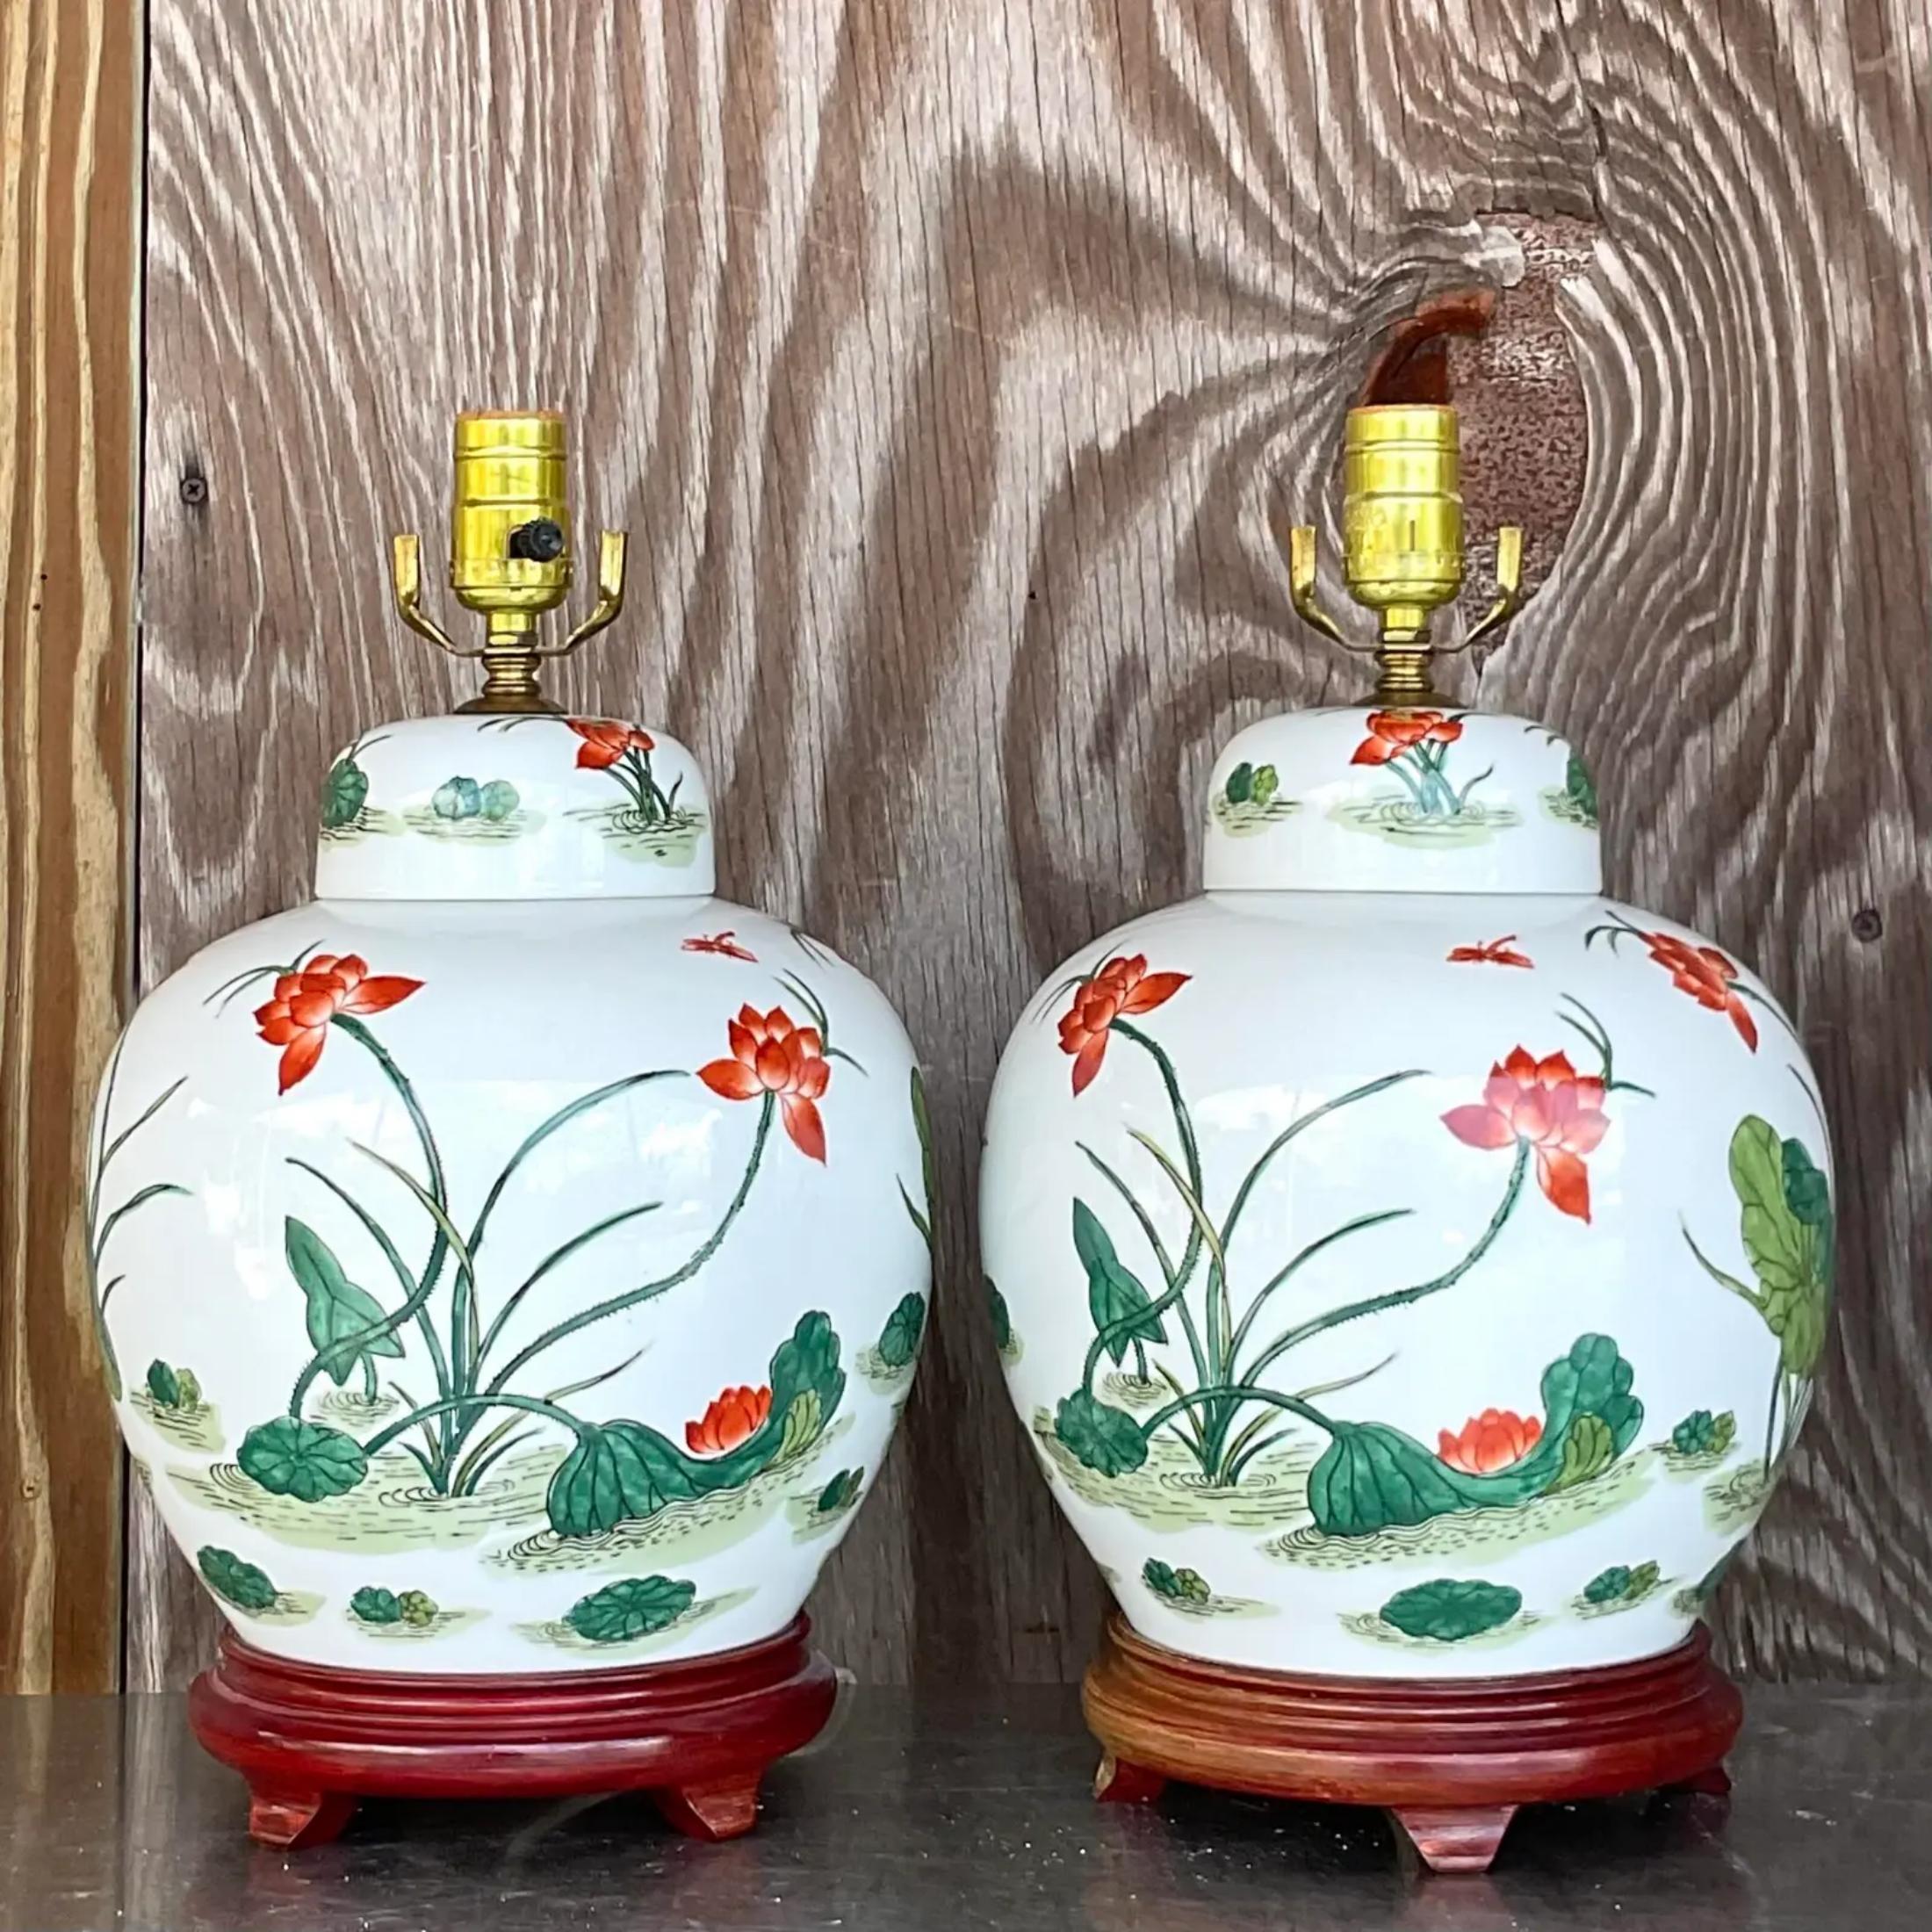 Chinese Chippendale Vintage Asian Glazed Ceramic Ginger Jar Lamps - a Pair For Sale